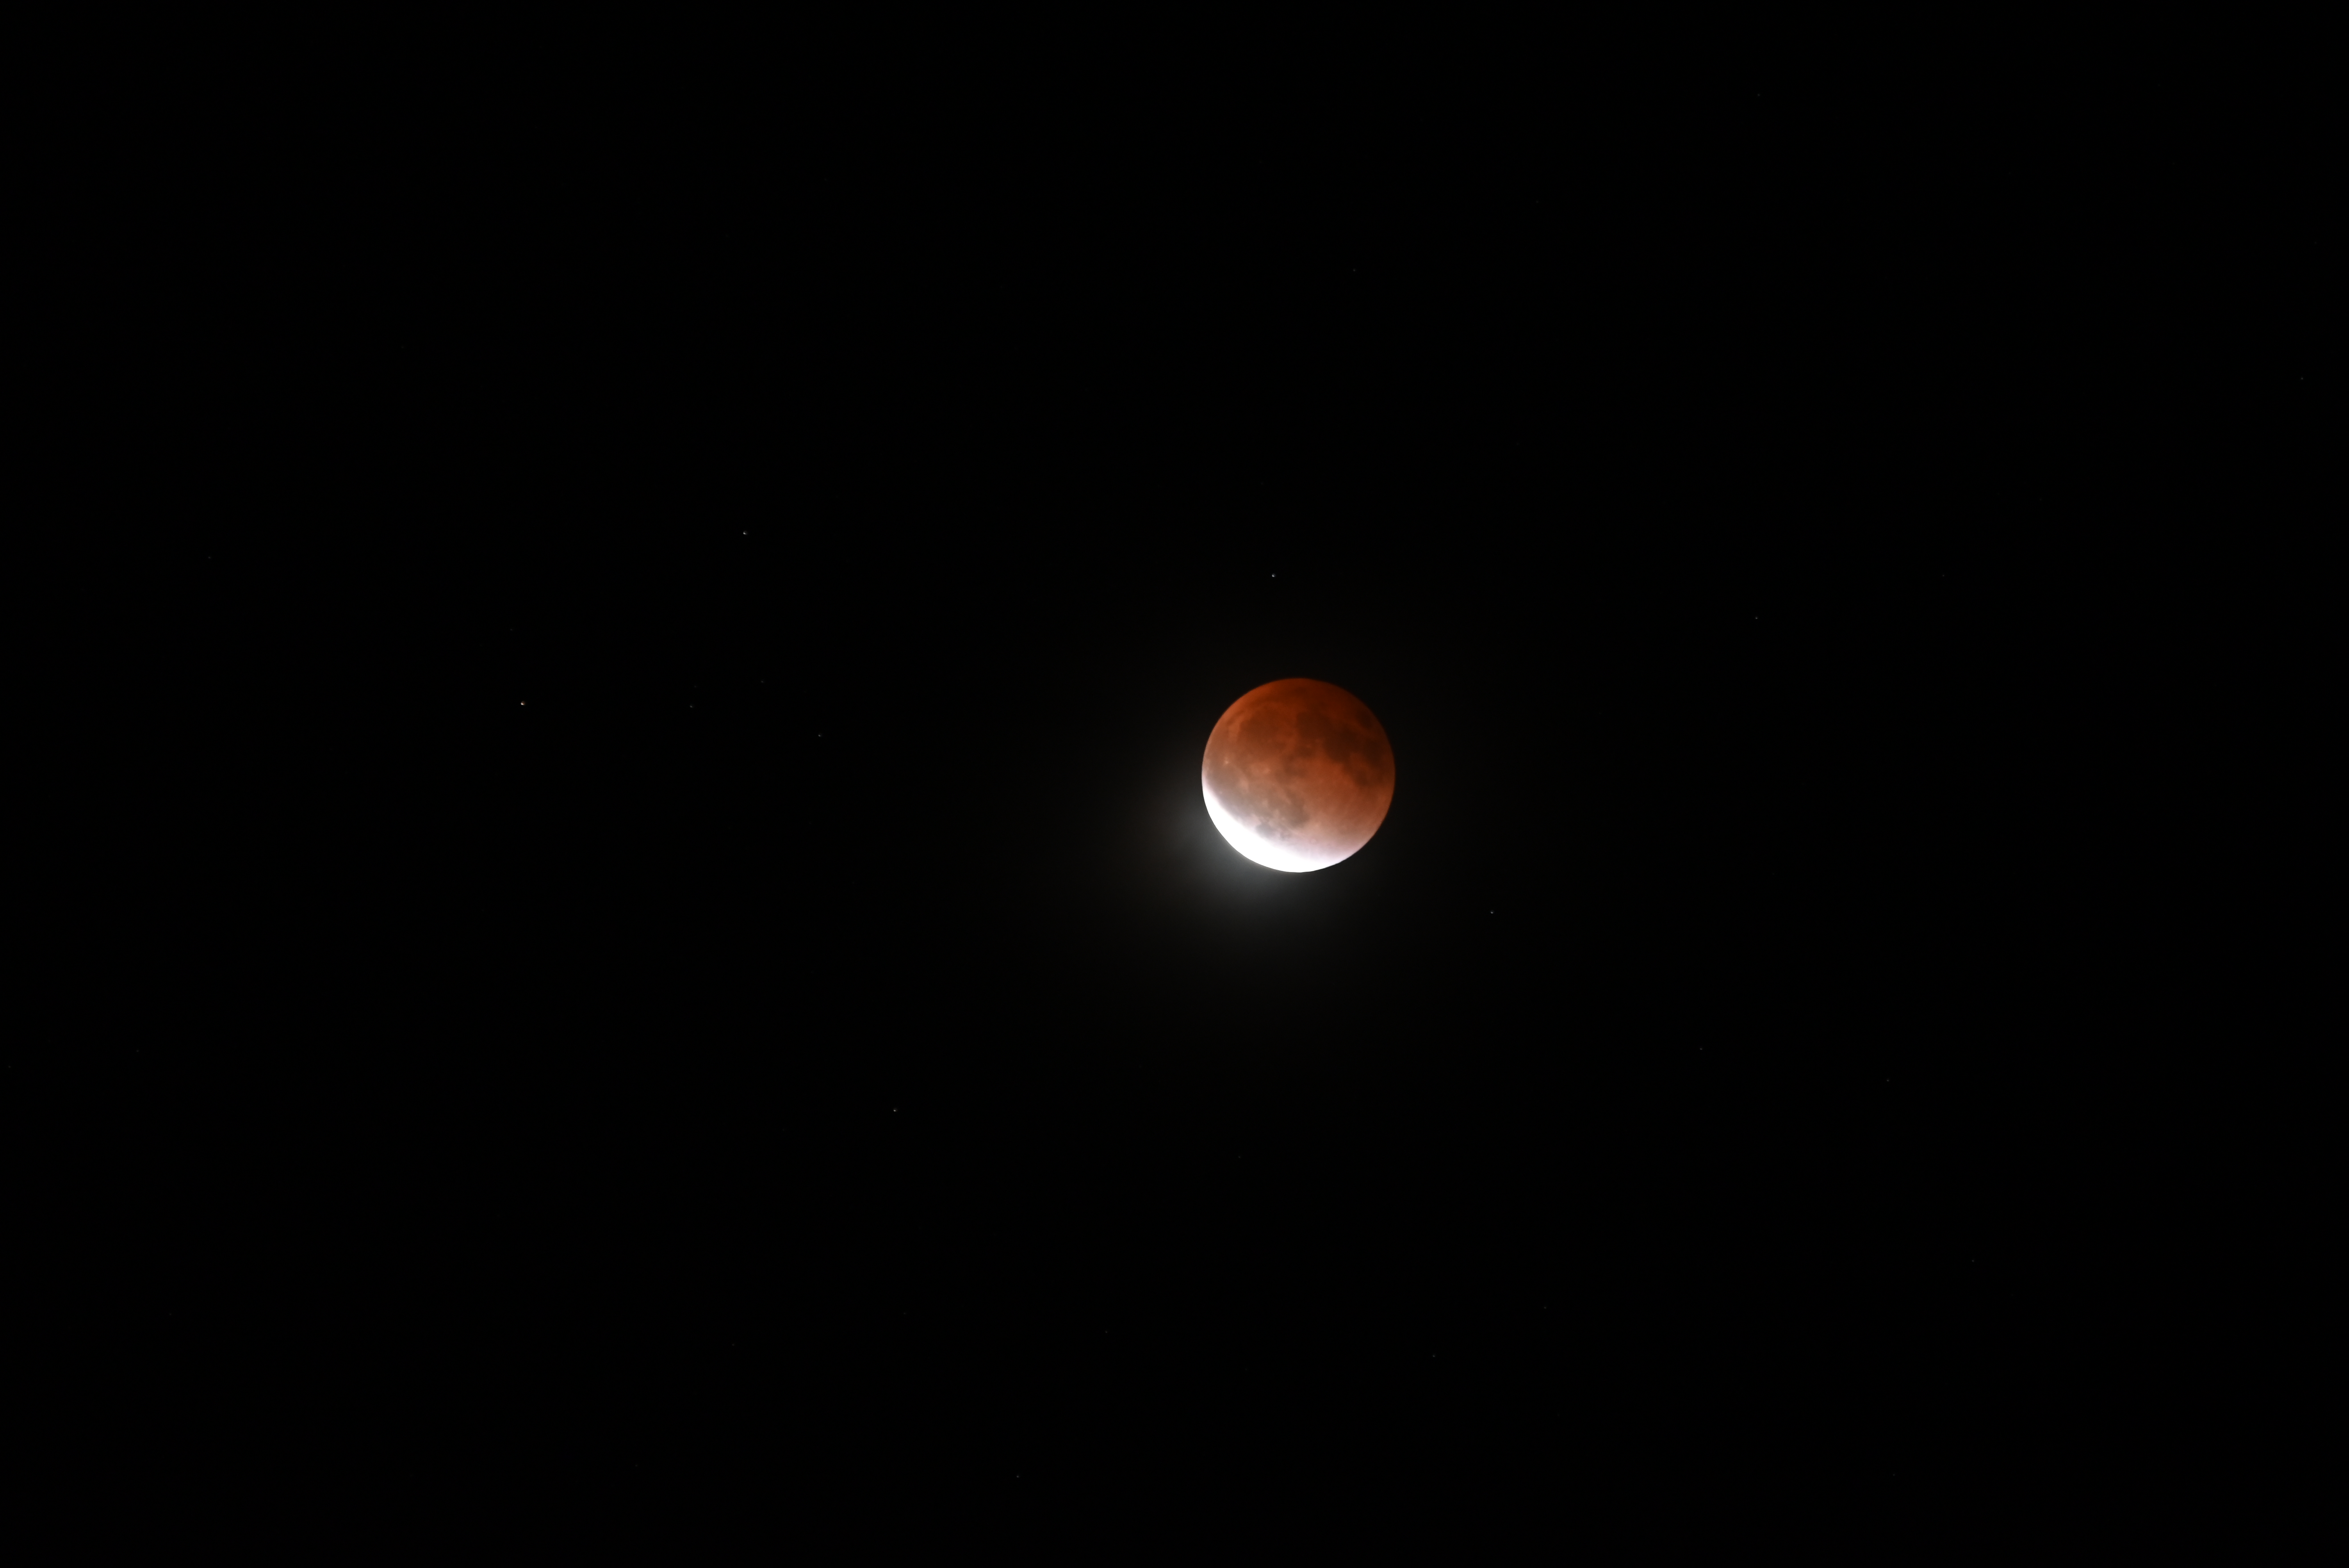 This photo of the Blood Moon was taken during the total lunar eclipse late Sunday night using a Nikon digital camera and 300mm focal length lens.